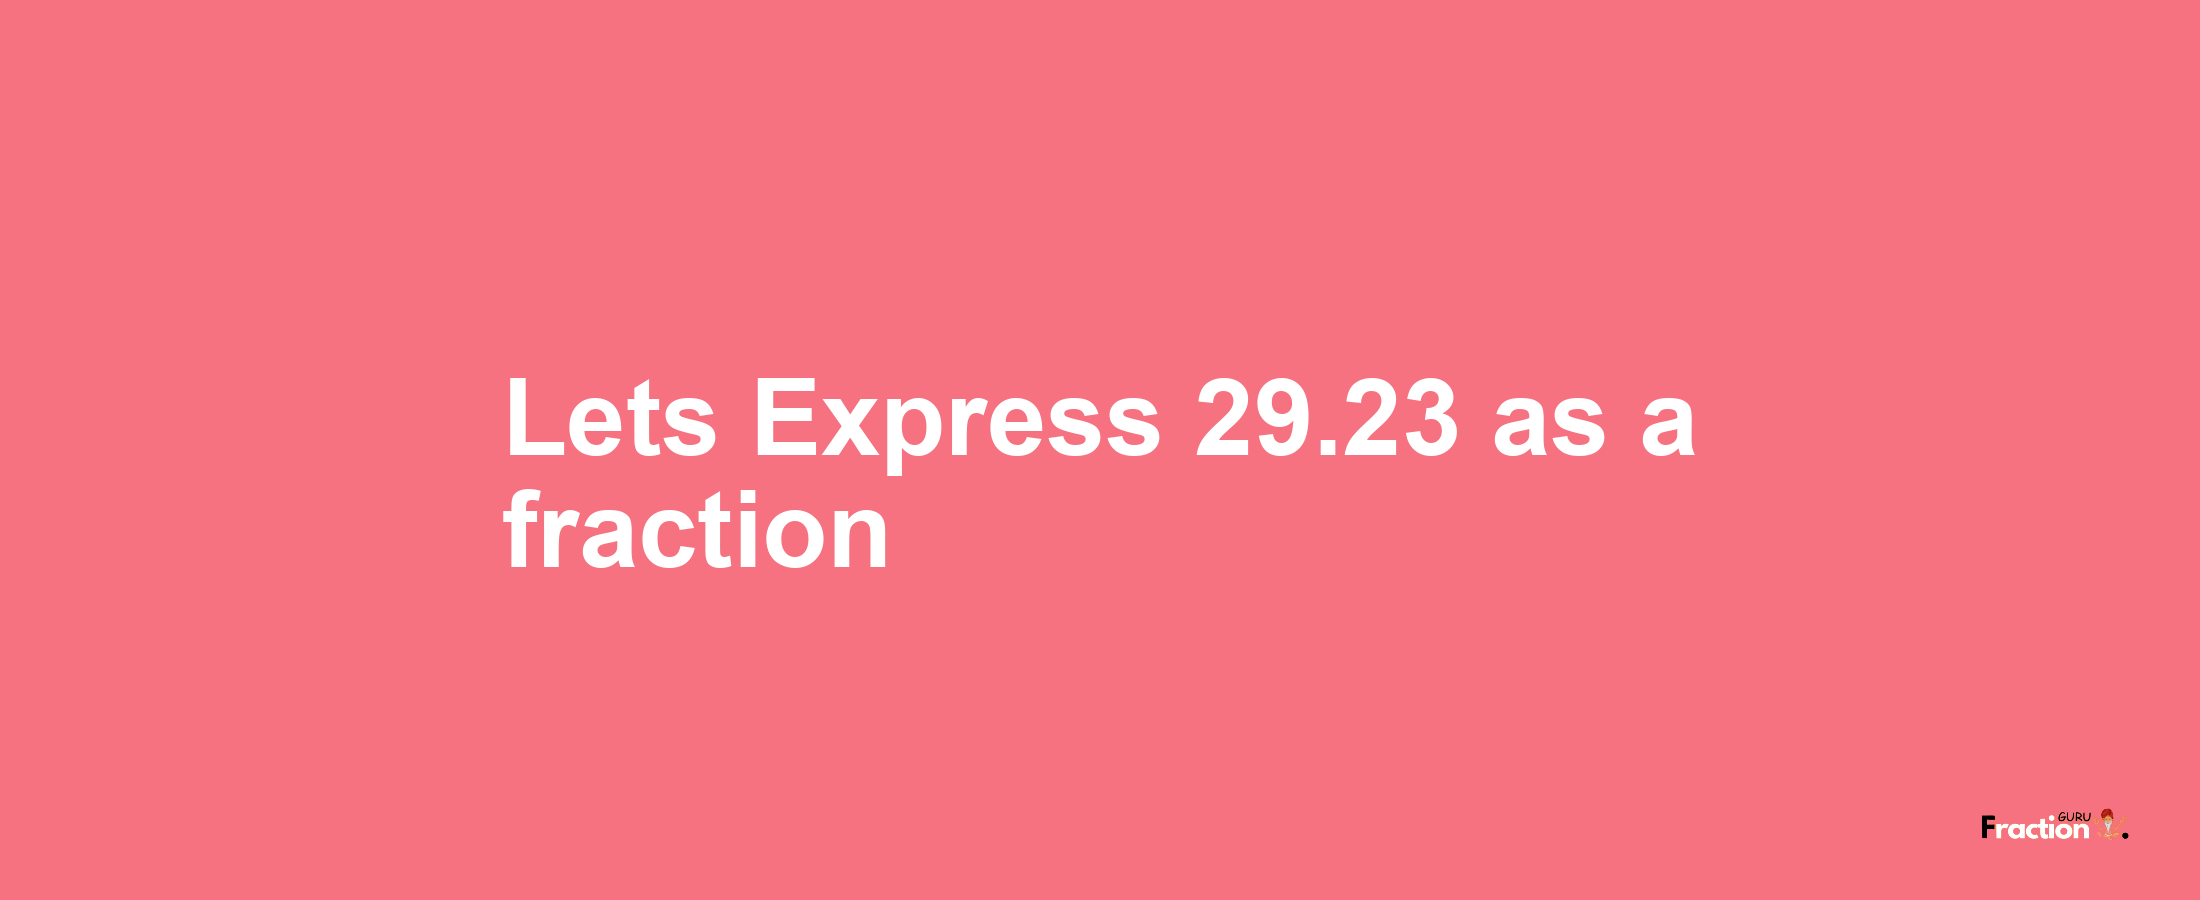 Lets Express 29.23 as afraction